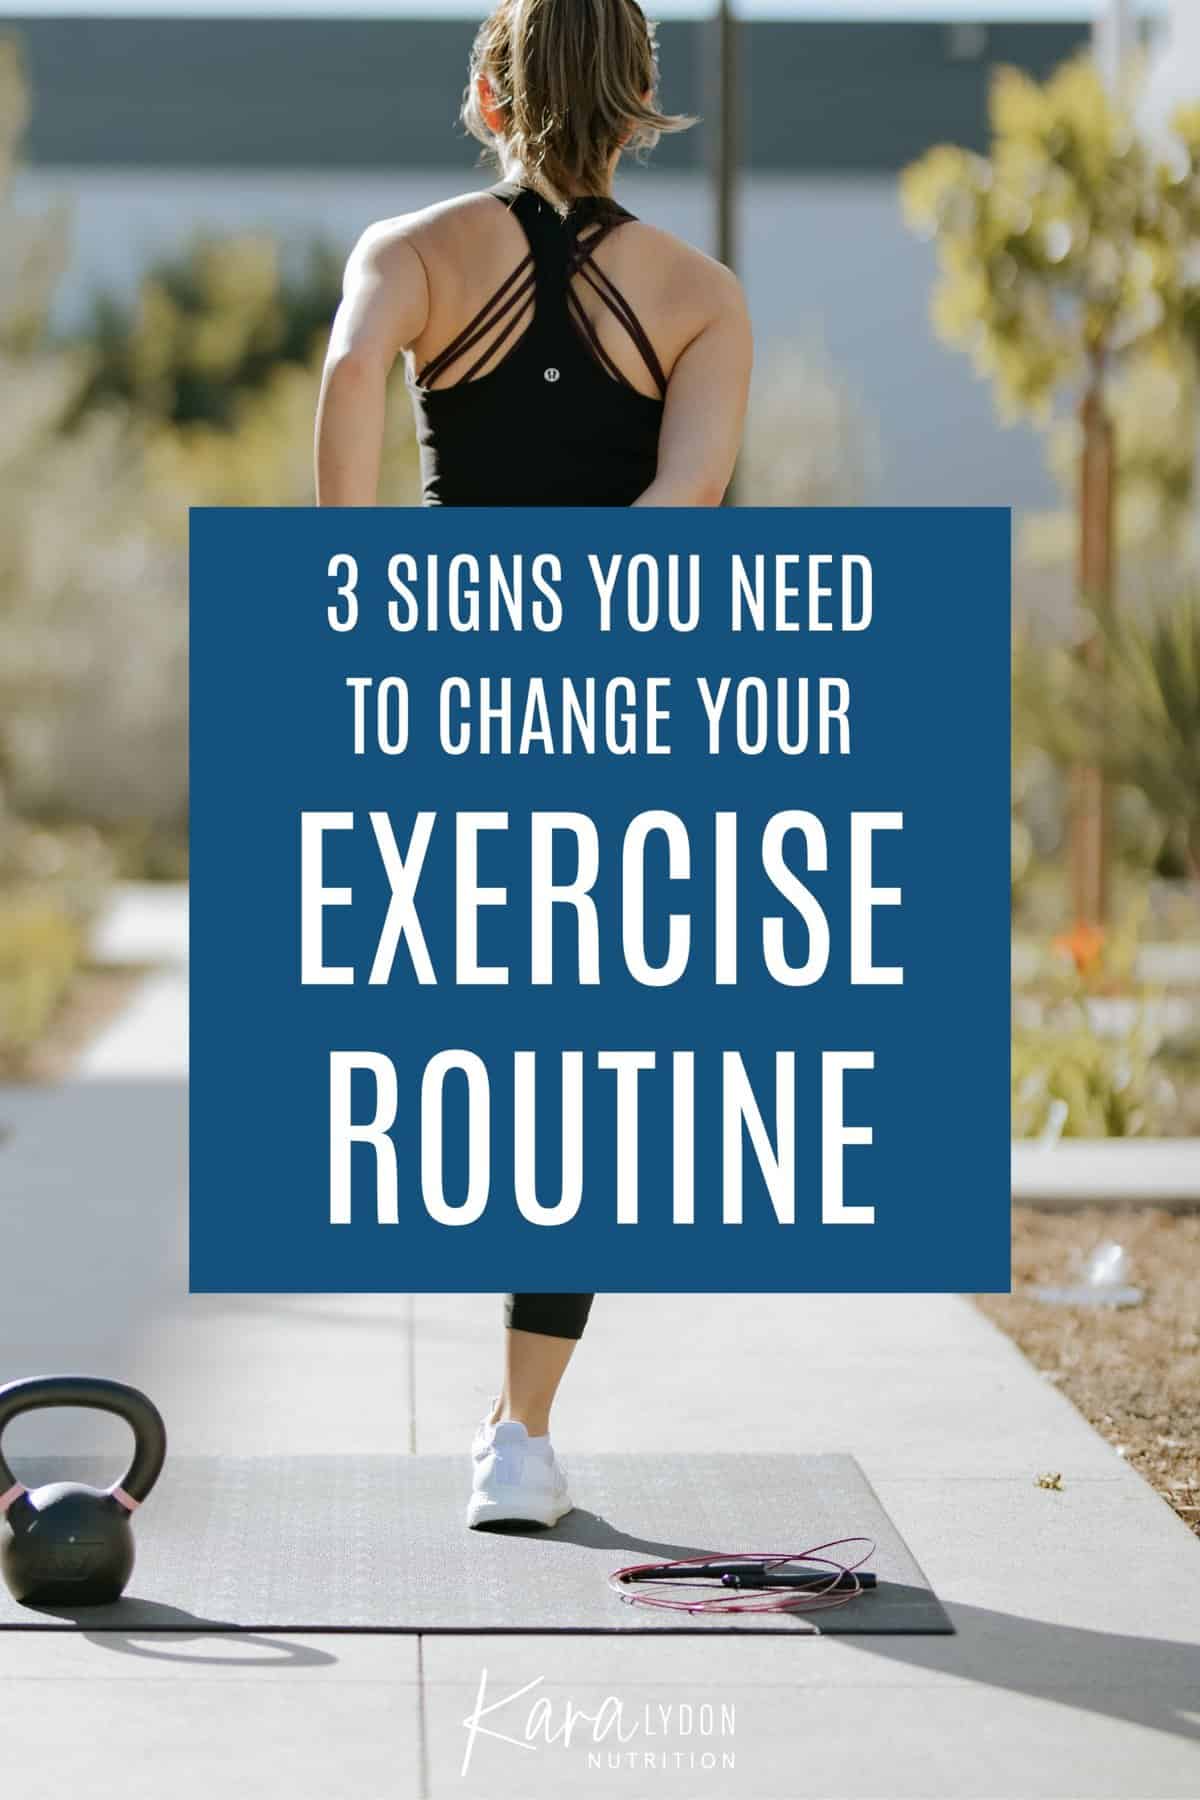 Do you dread exercise? 3 Signs you need to change your exercise routine